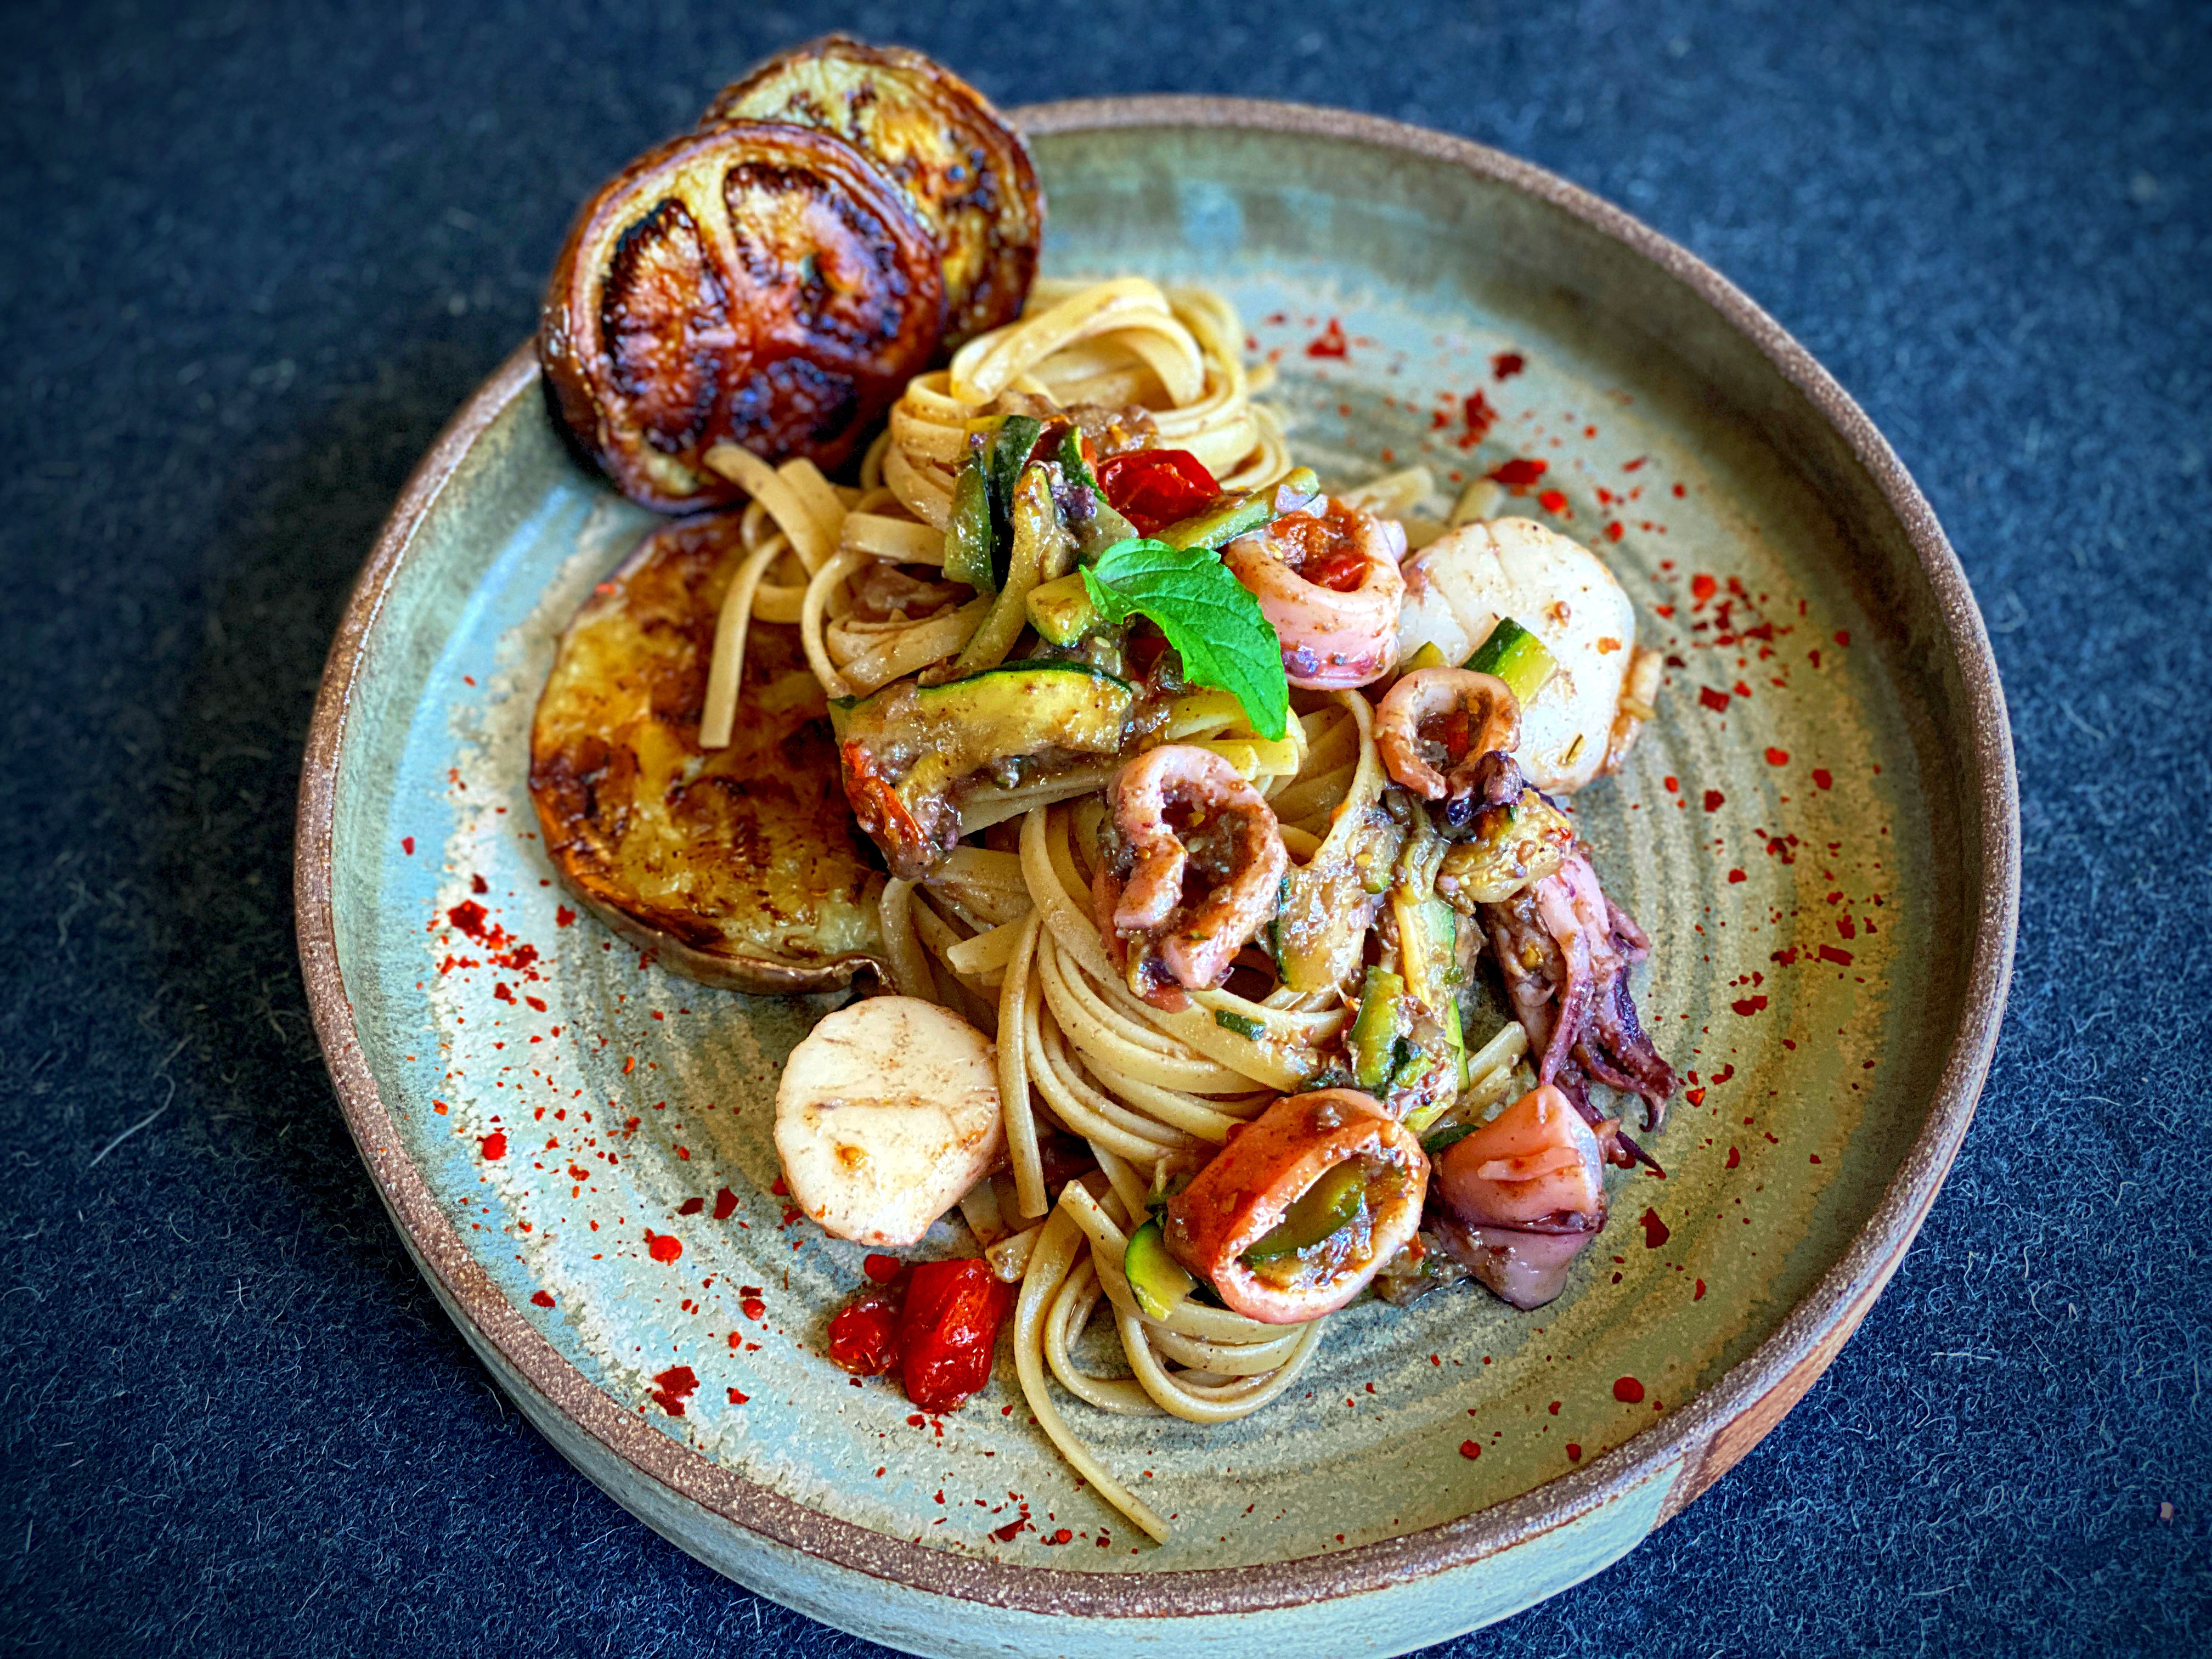 Squid and Scallops Linguine with Zucchini and Eggplant